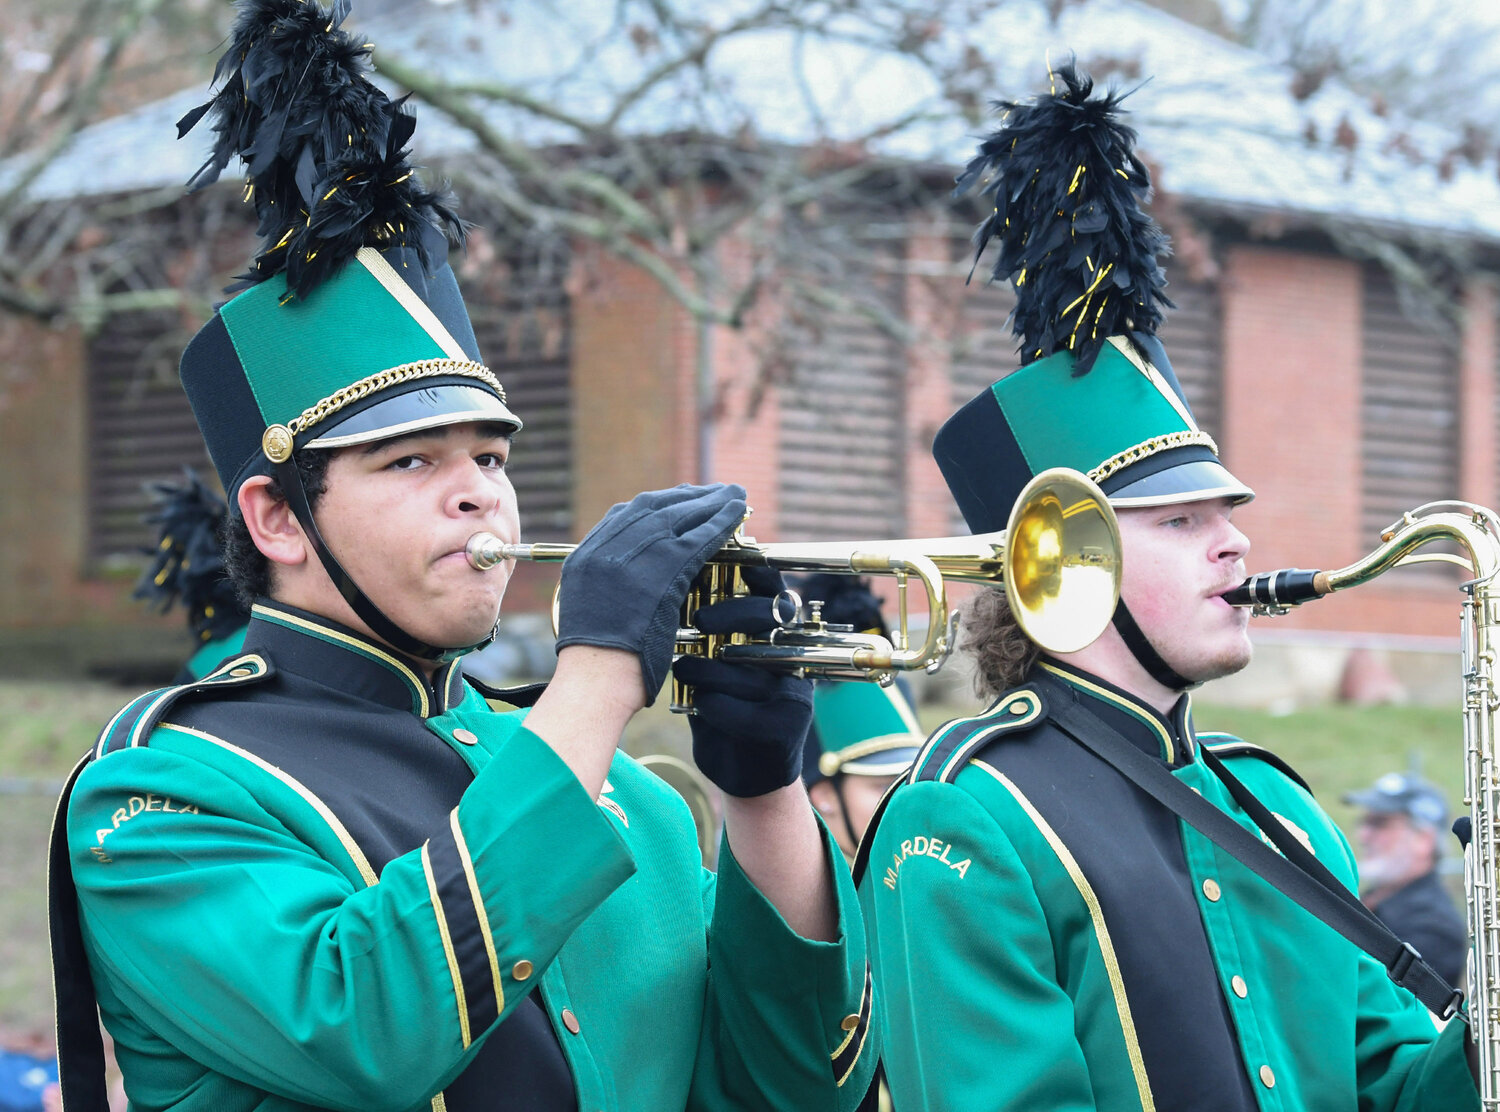 The horns section of the Mardela High School Band perform on East Main Street.